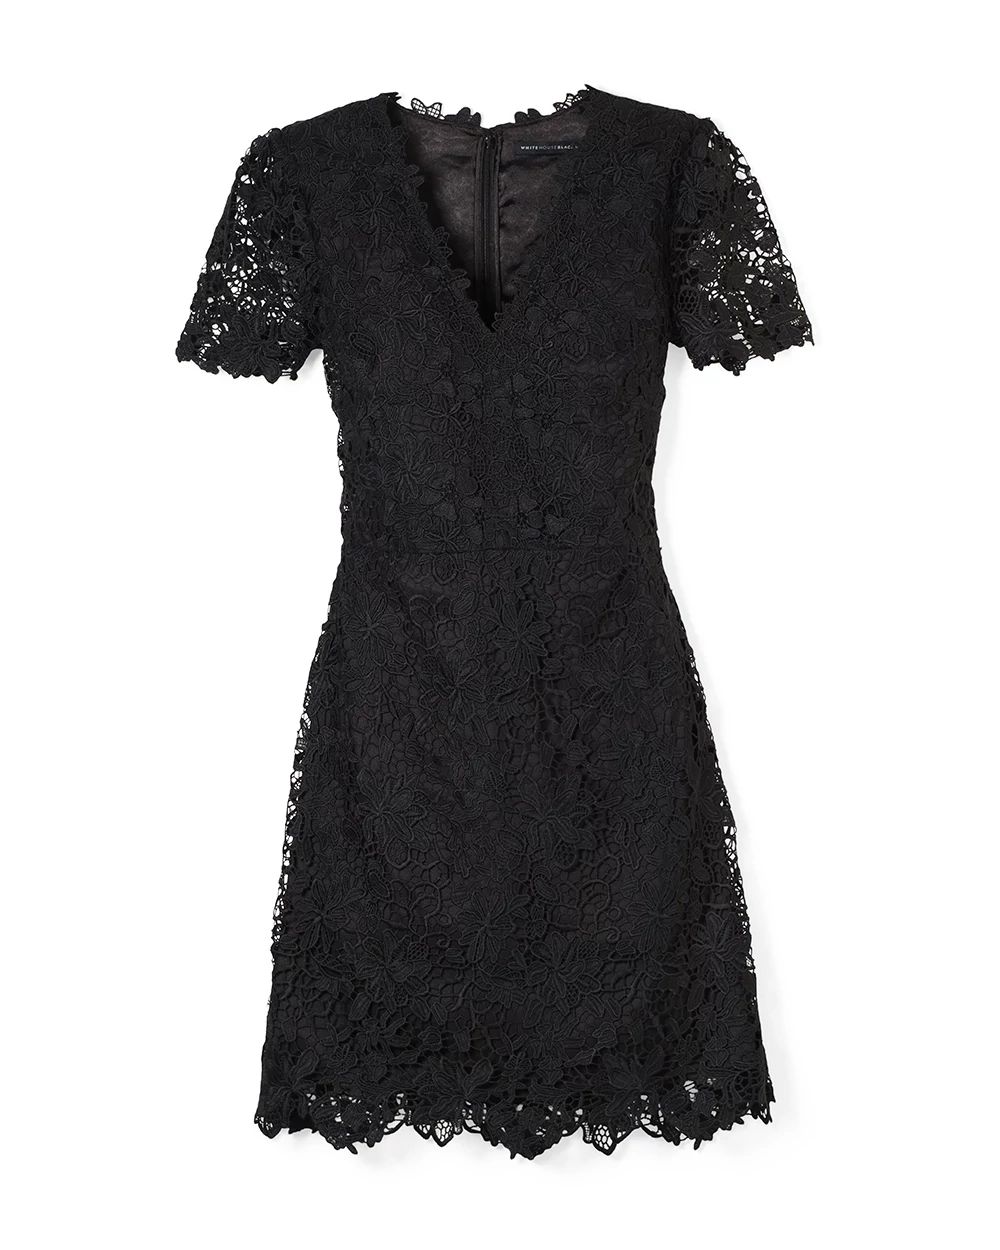 Short Sleeve V-neck Lace A-Line Dress click to view larger image.